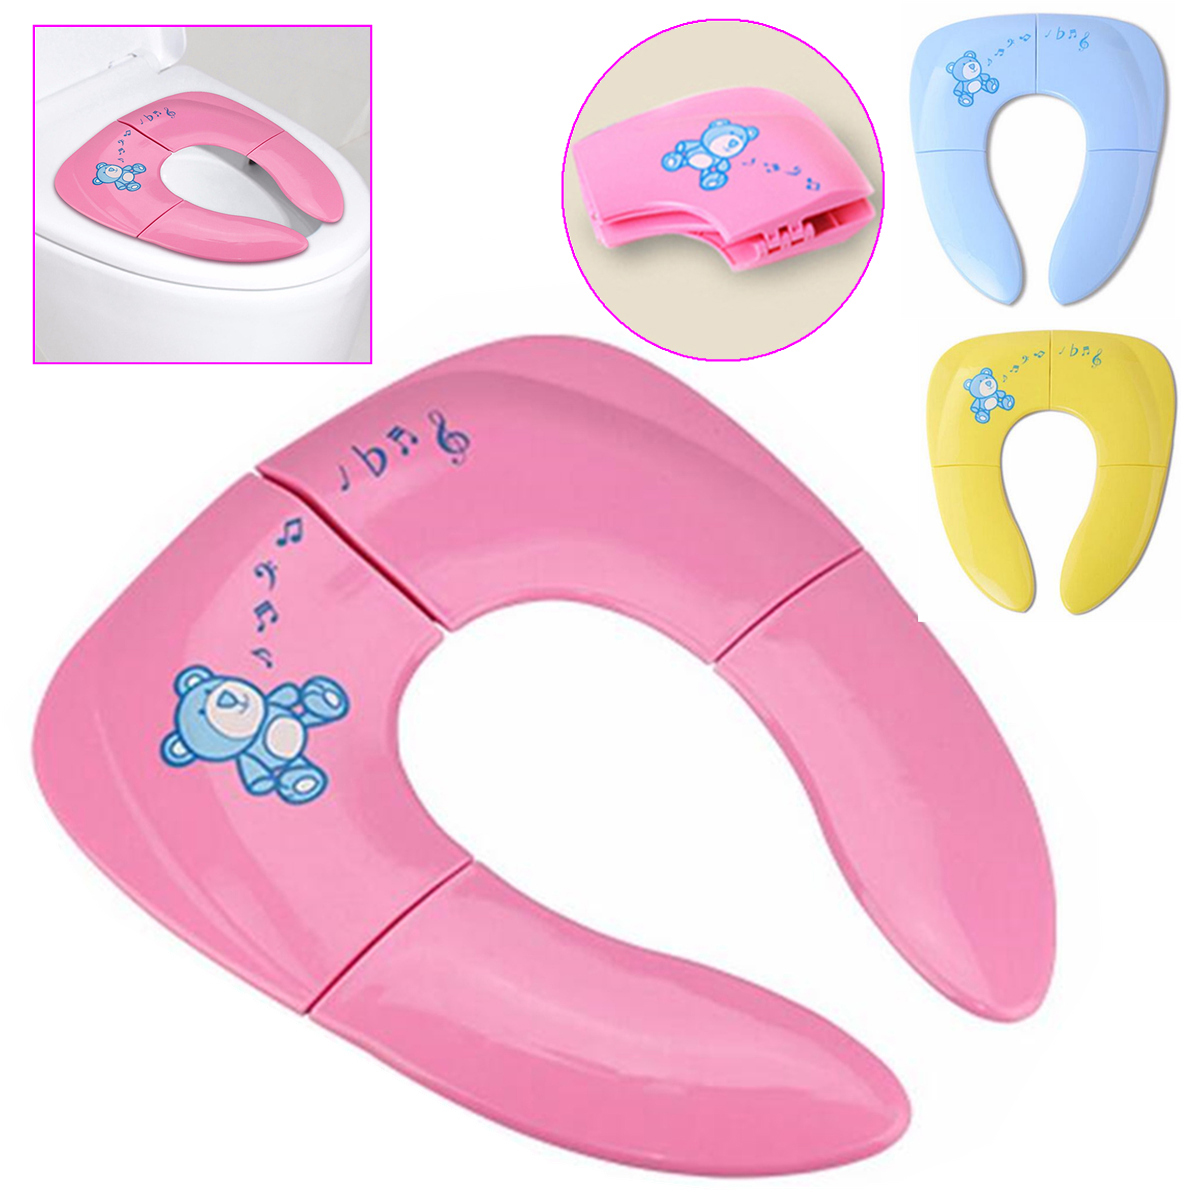 

Portable Foldable Baby Toddler Potty Toilet Seat Covers Pad Cushion Training Children Kids WC